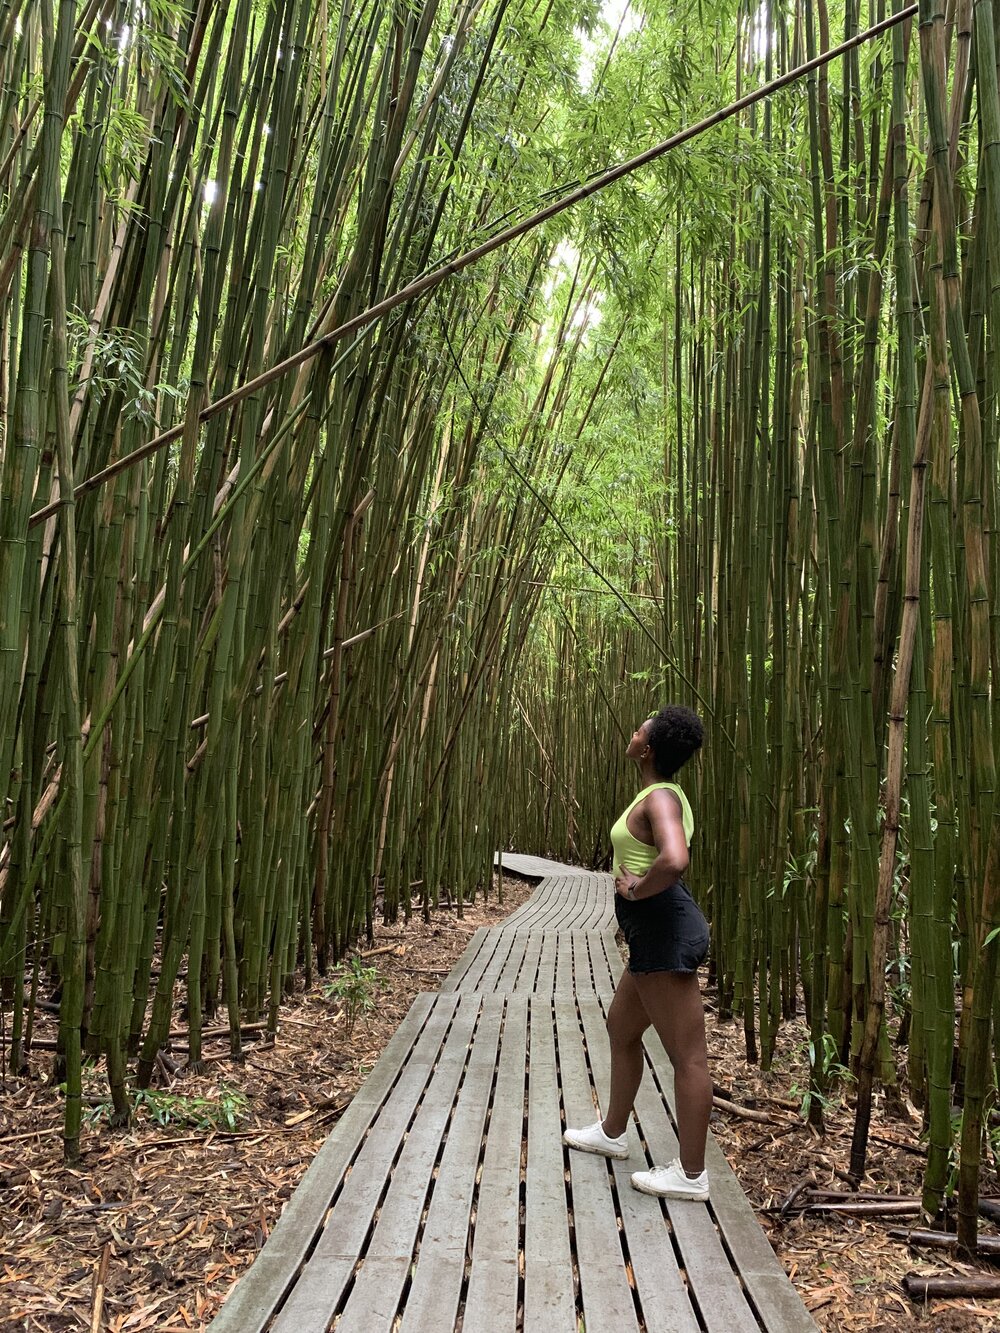  You’ll find this bamboo forest along the trail! 